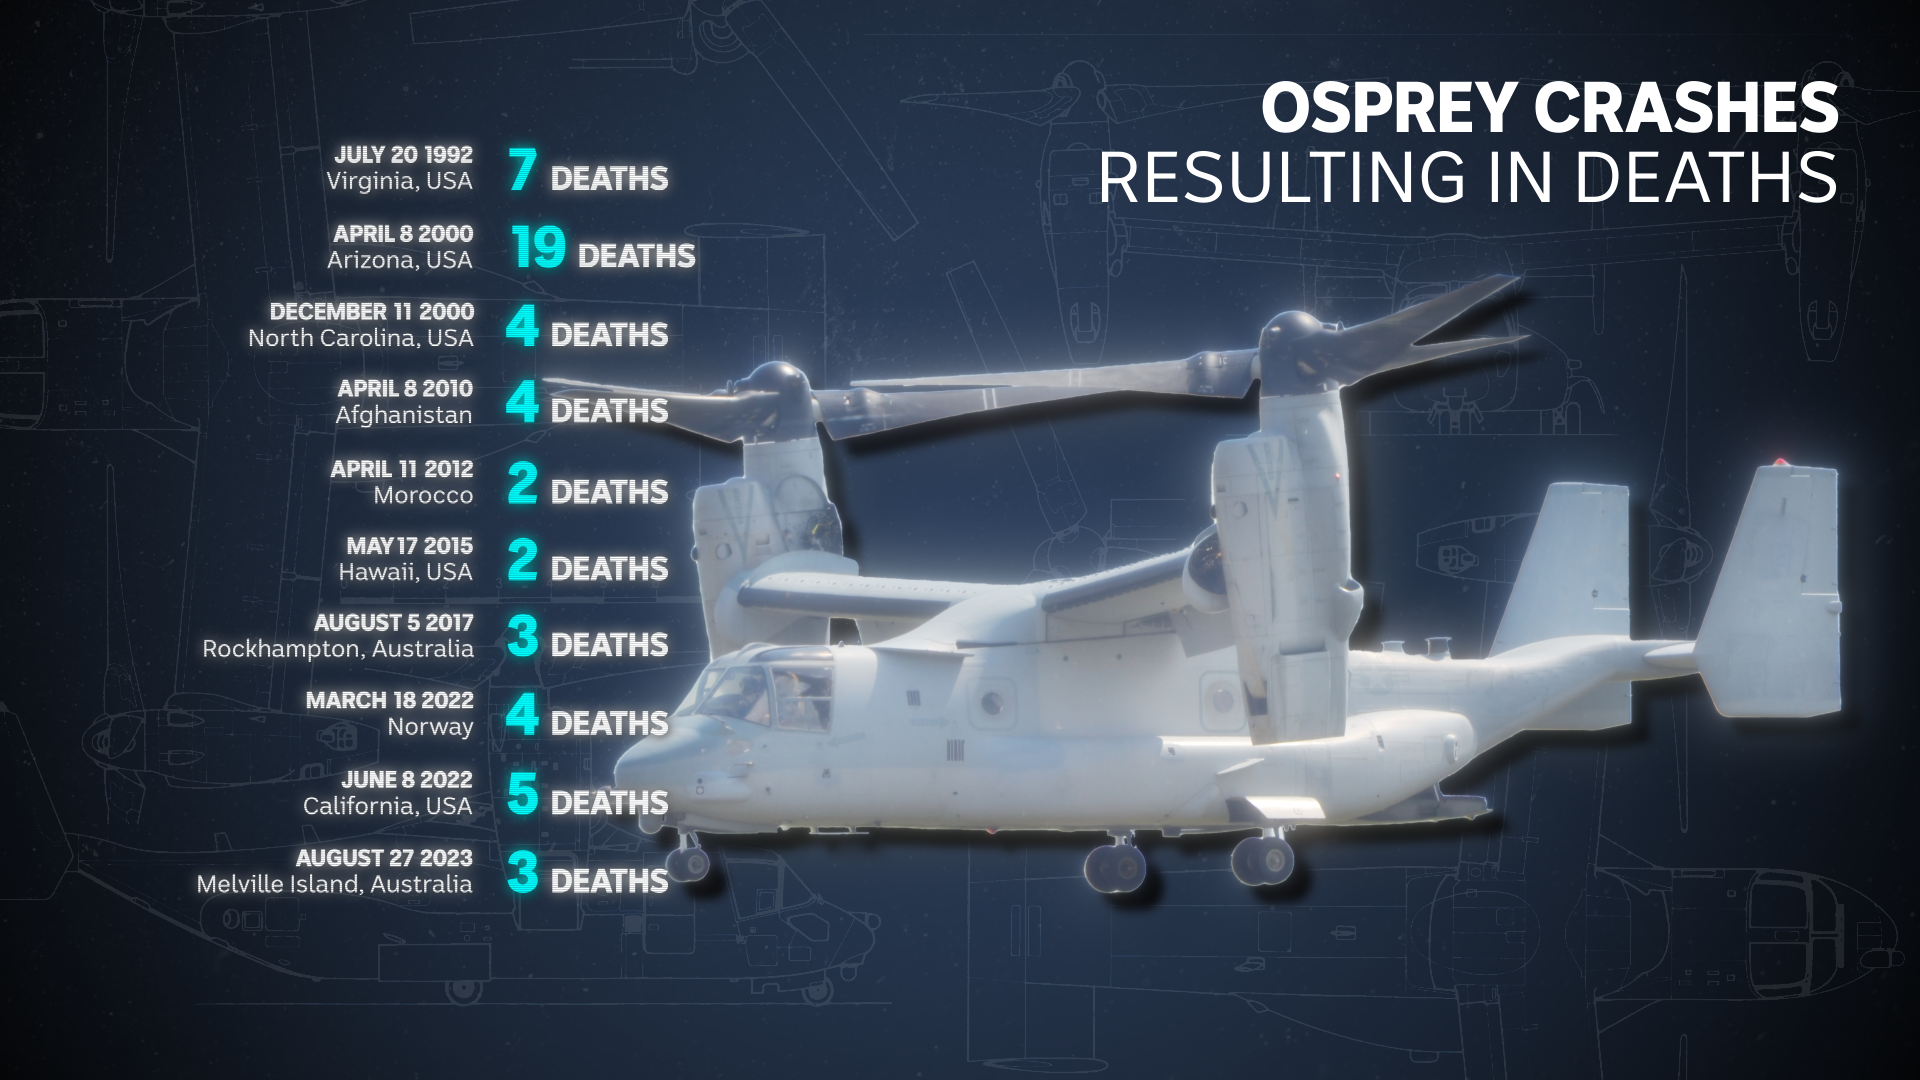 Timeline lists 10 instances where people died in Osprey crashes